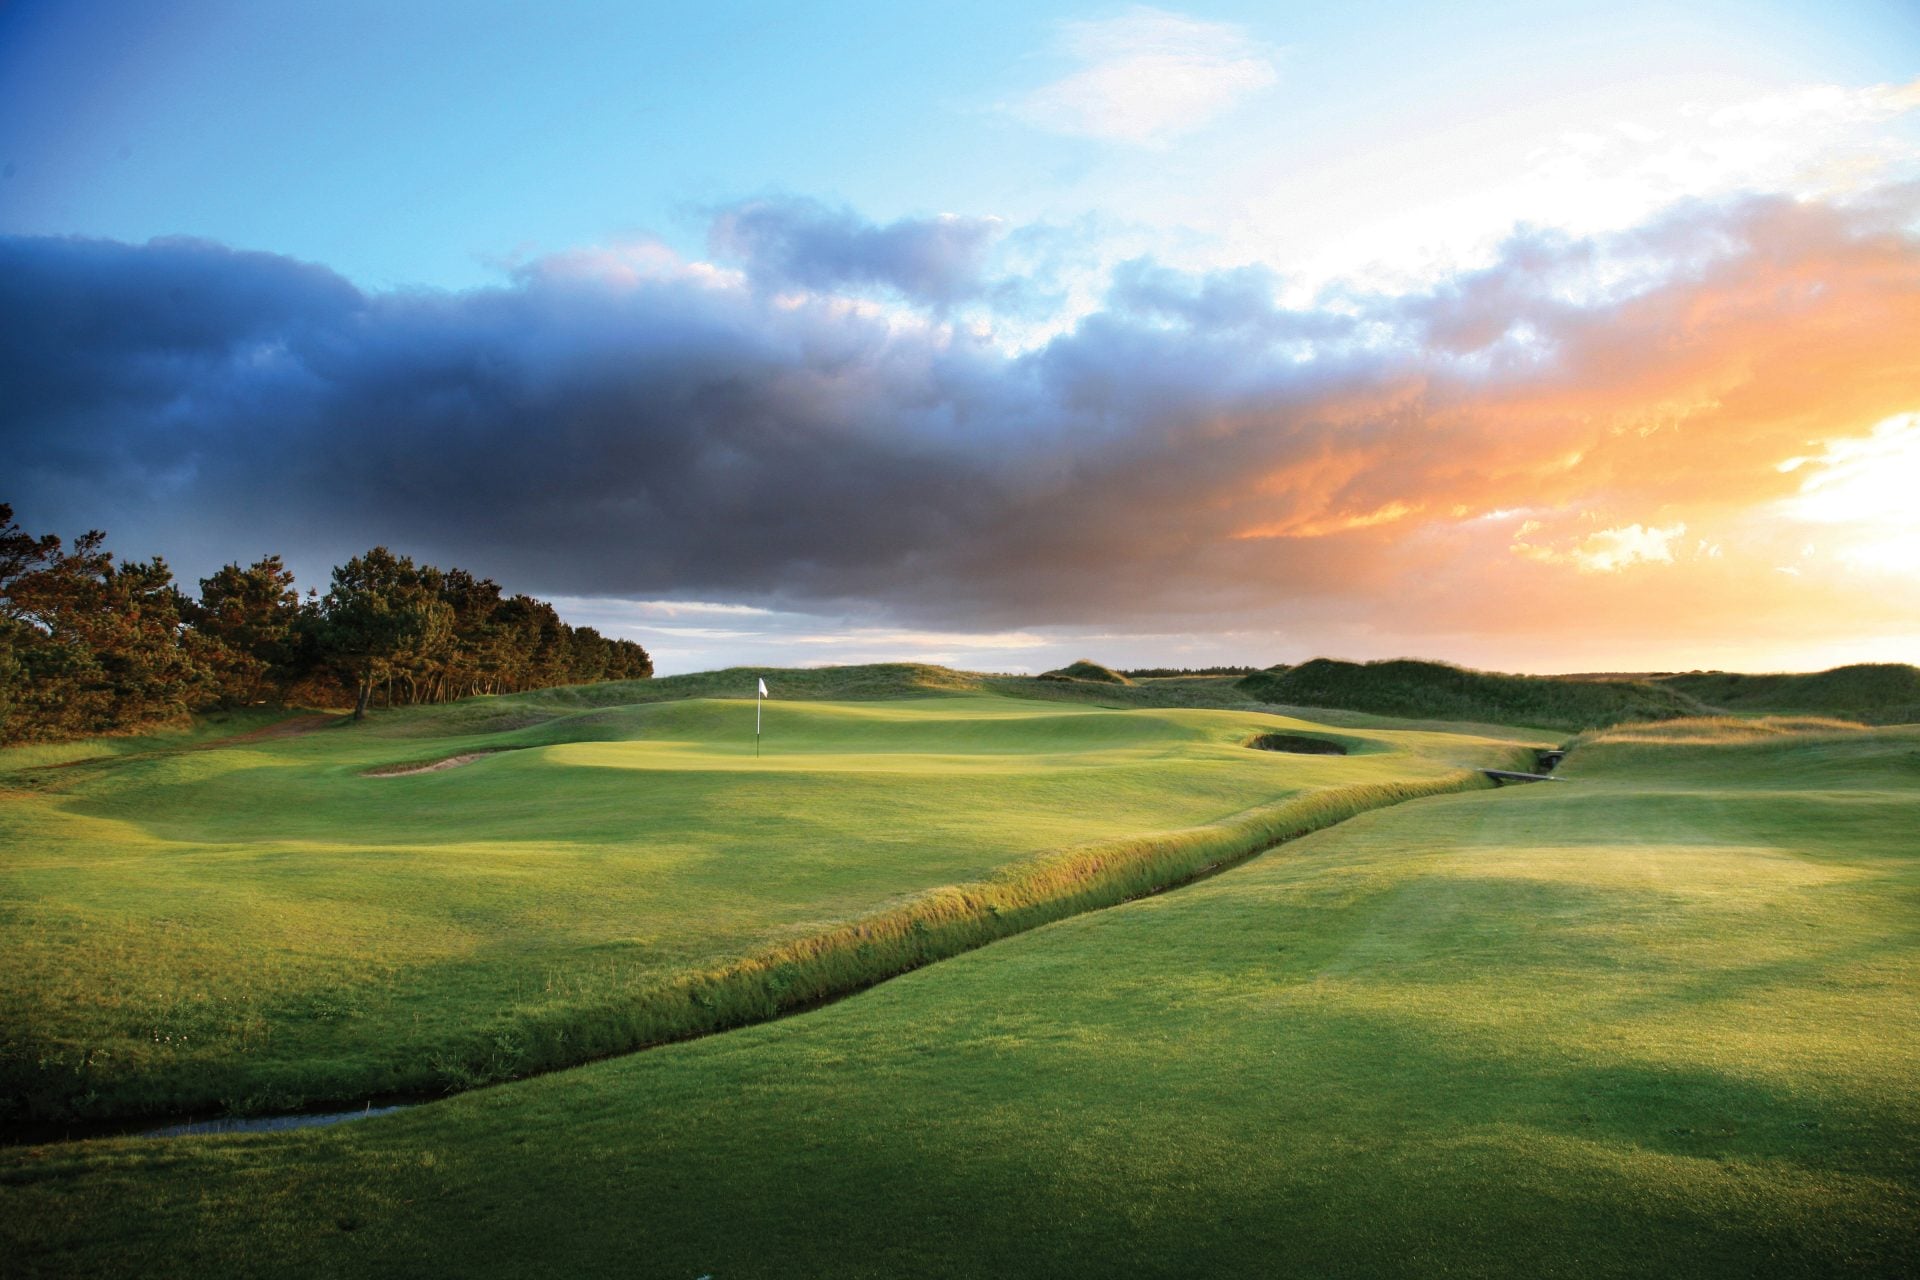 The 13th hole has a deep trench running across the approach to the green at Dundonald Links, Scotland, United Kingdom